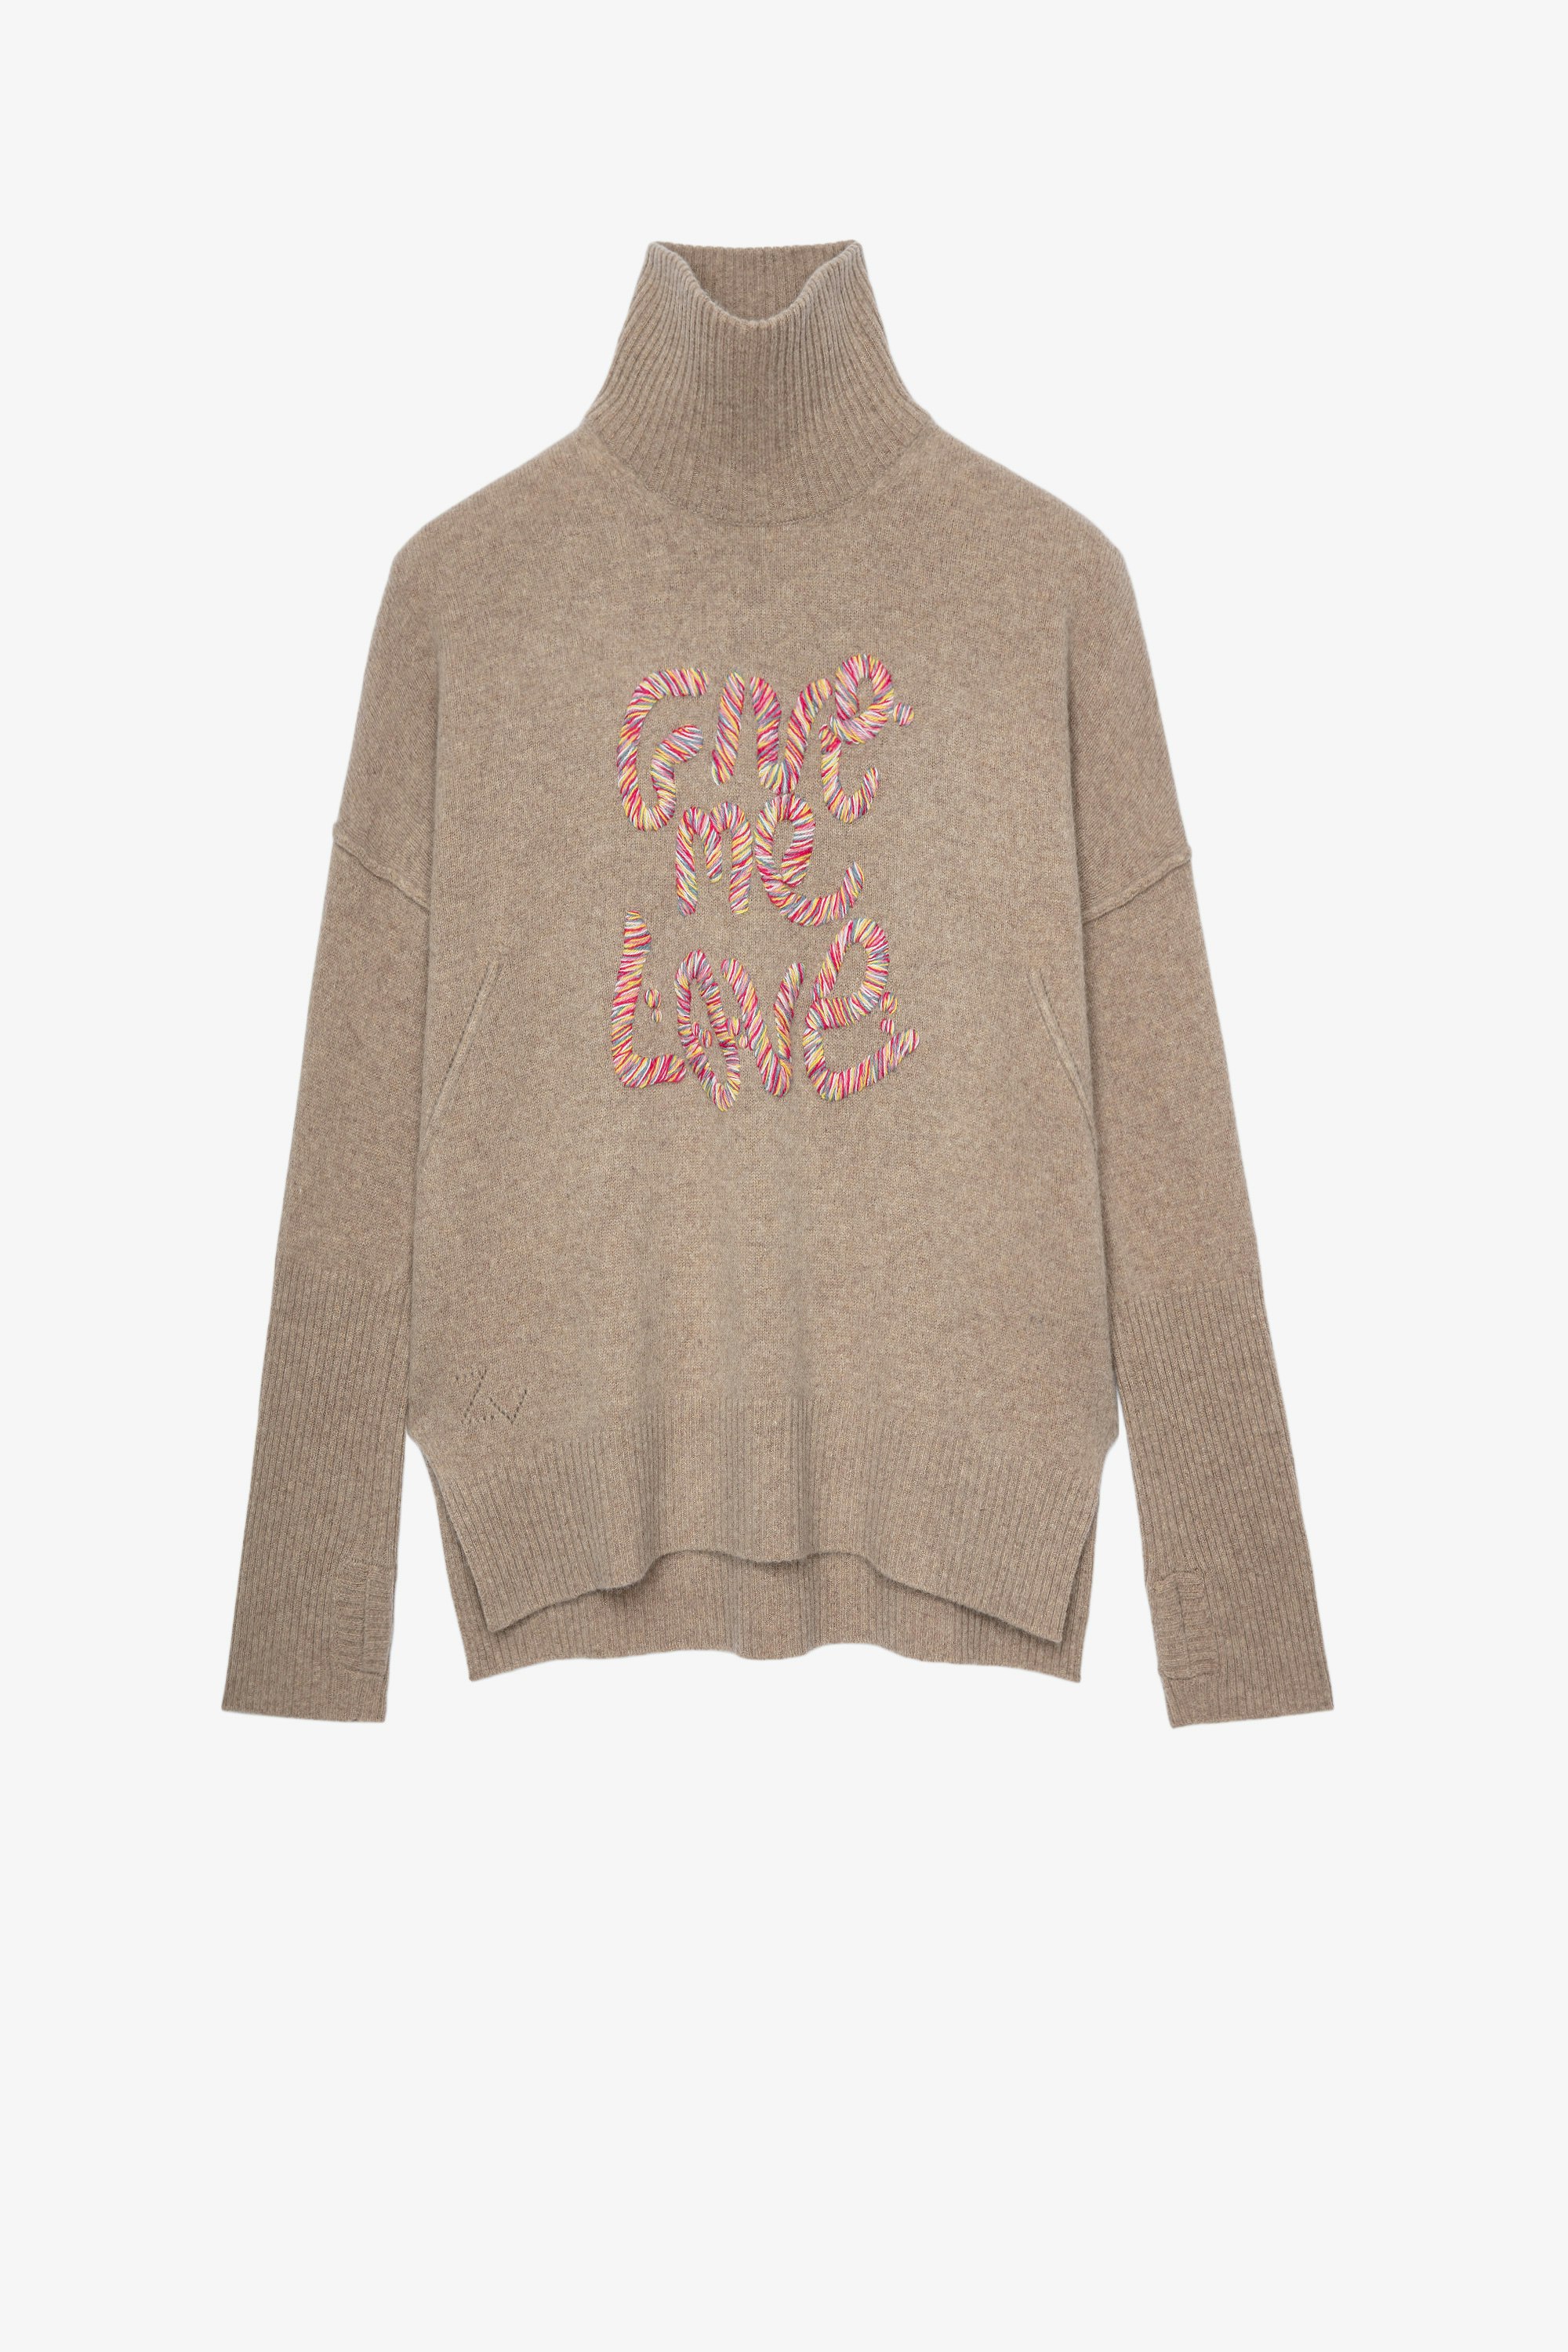 Alma We Give Me Love Jumper Beige knit jumper with “Give Me Love” slogan